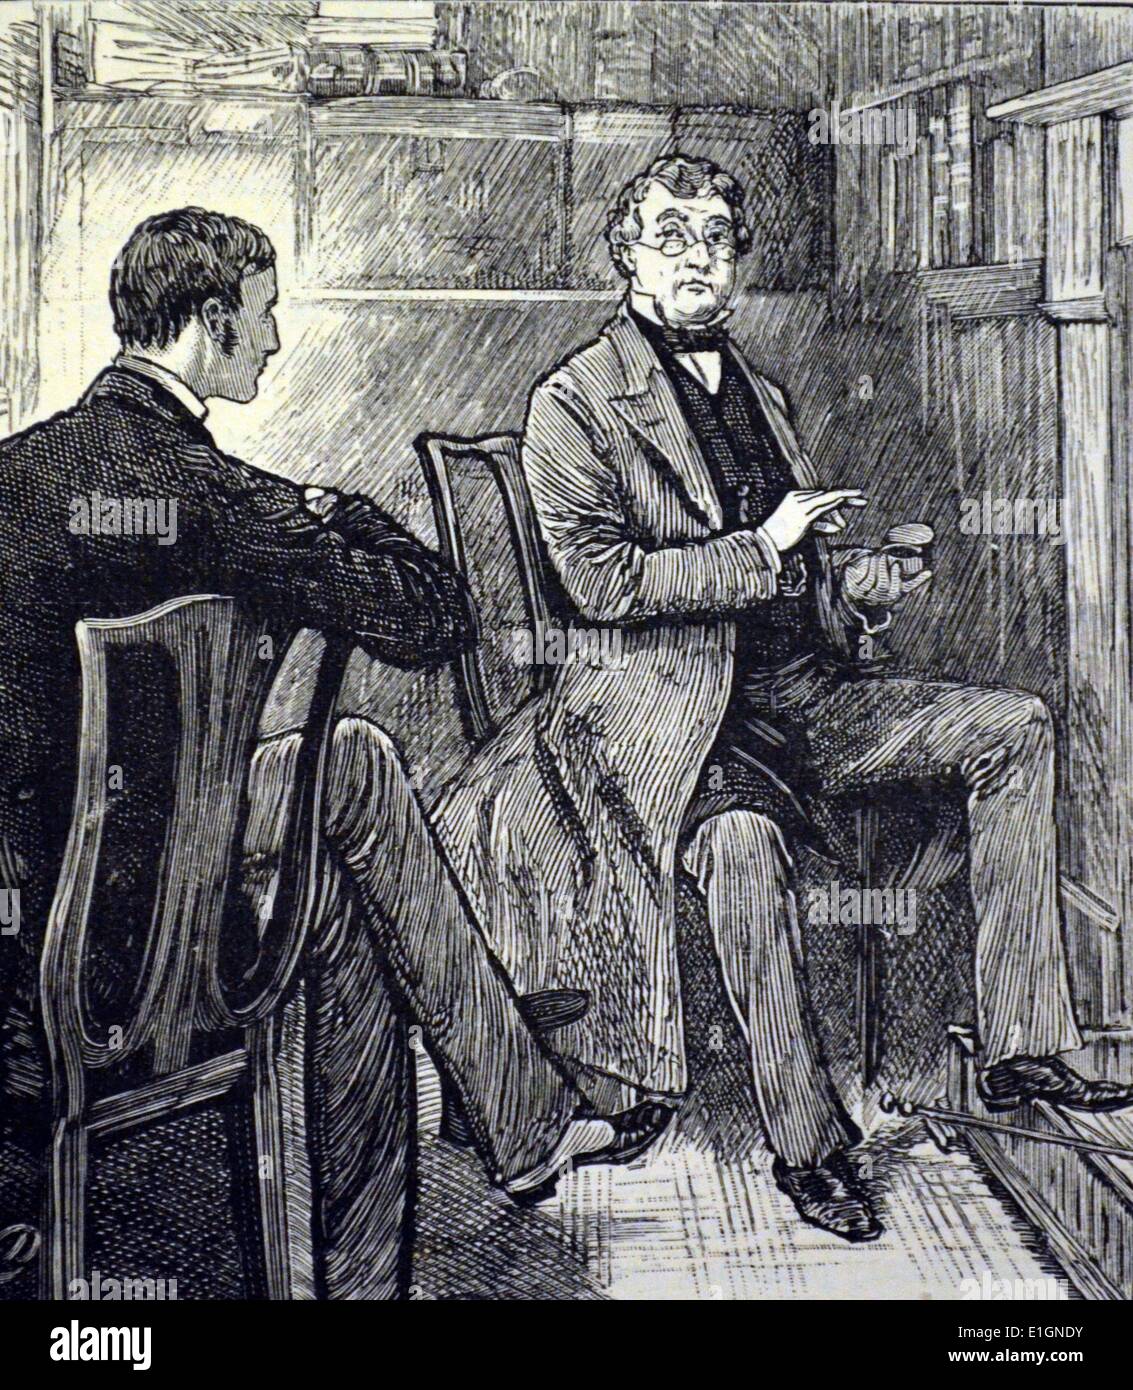 Professional gentleman sitting by fireside, taking apinch of snuff. Illustration by Frank Dadd, London, 1883. Stock Photo